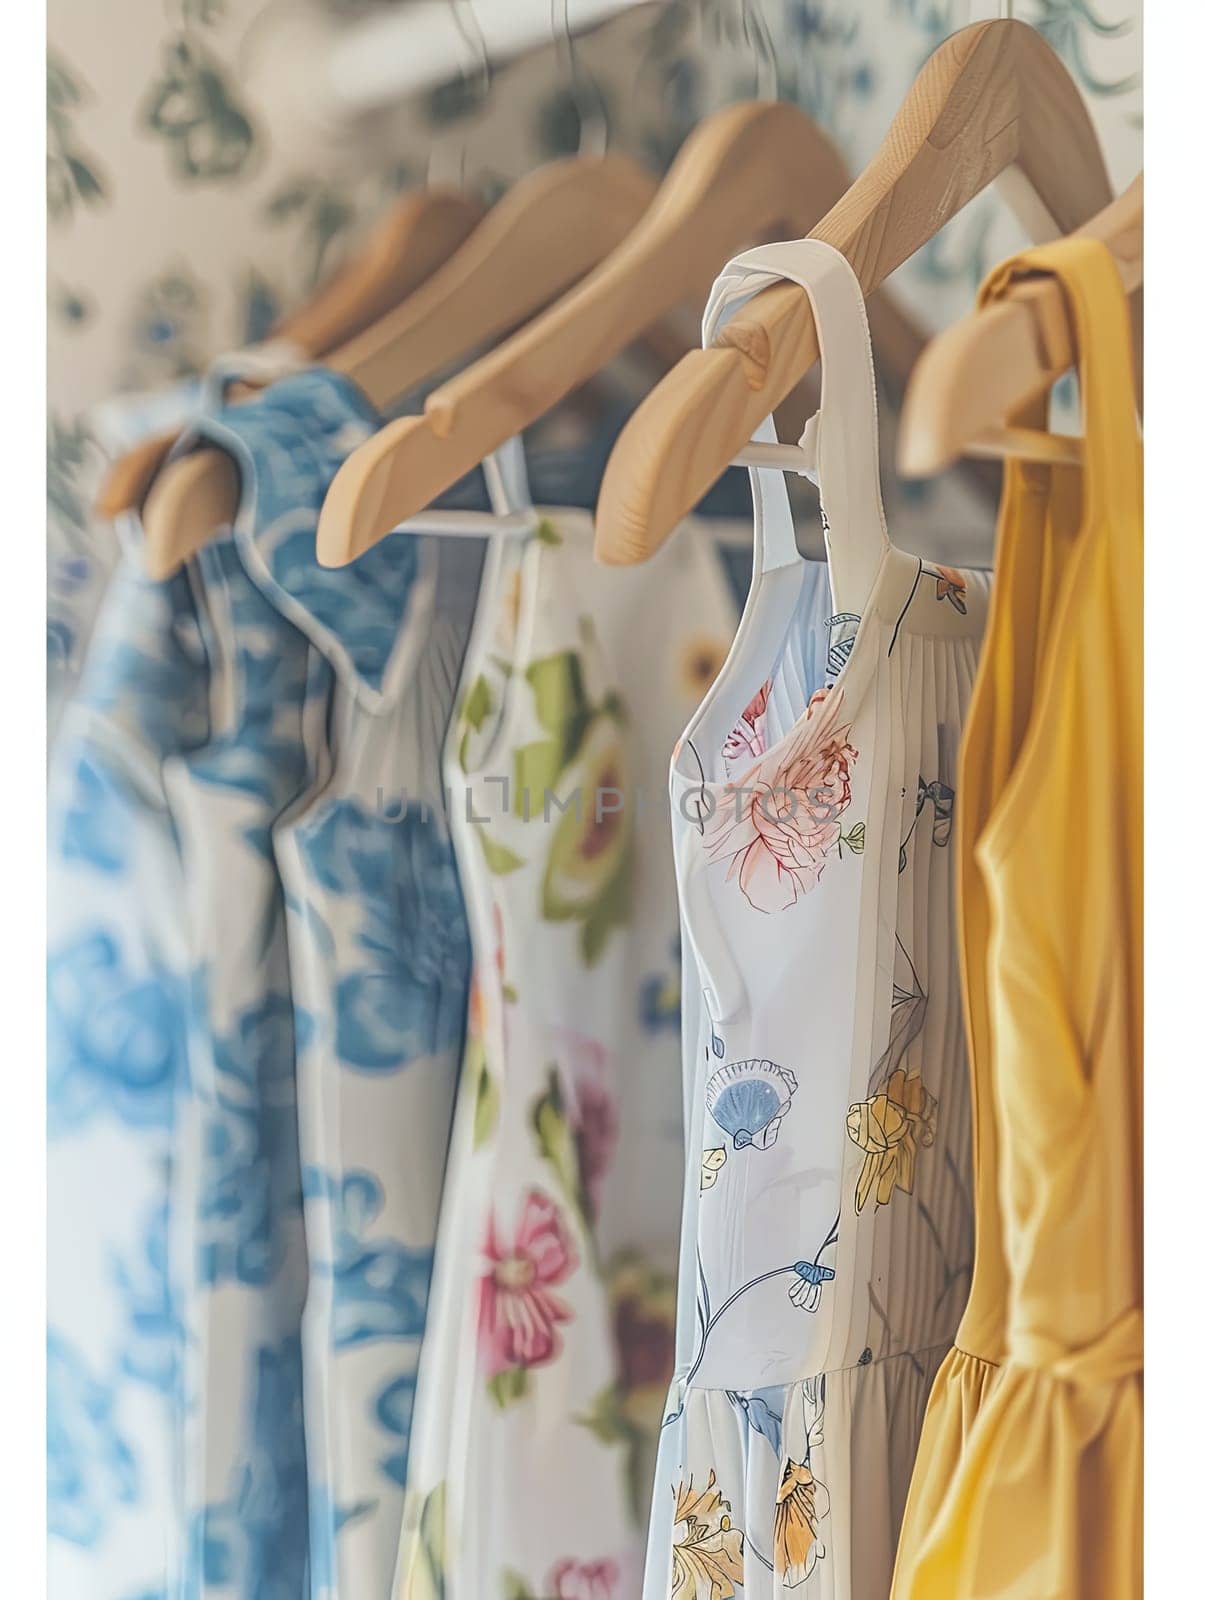 Fashionable summer dresses and shirts neatly arranged on hangers in a womens clothing showroom. Generative AI by AnatoliiFoto